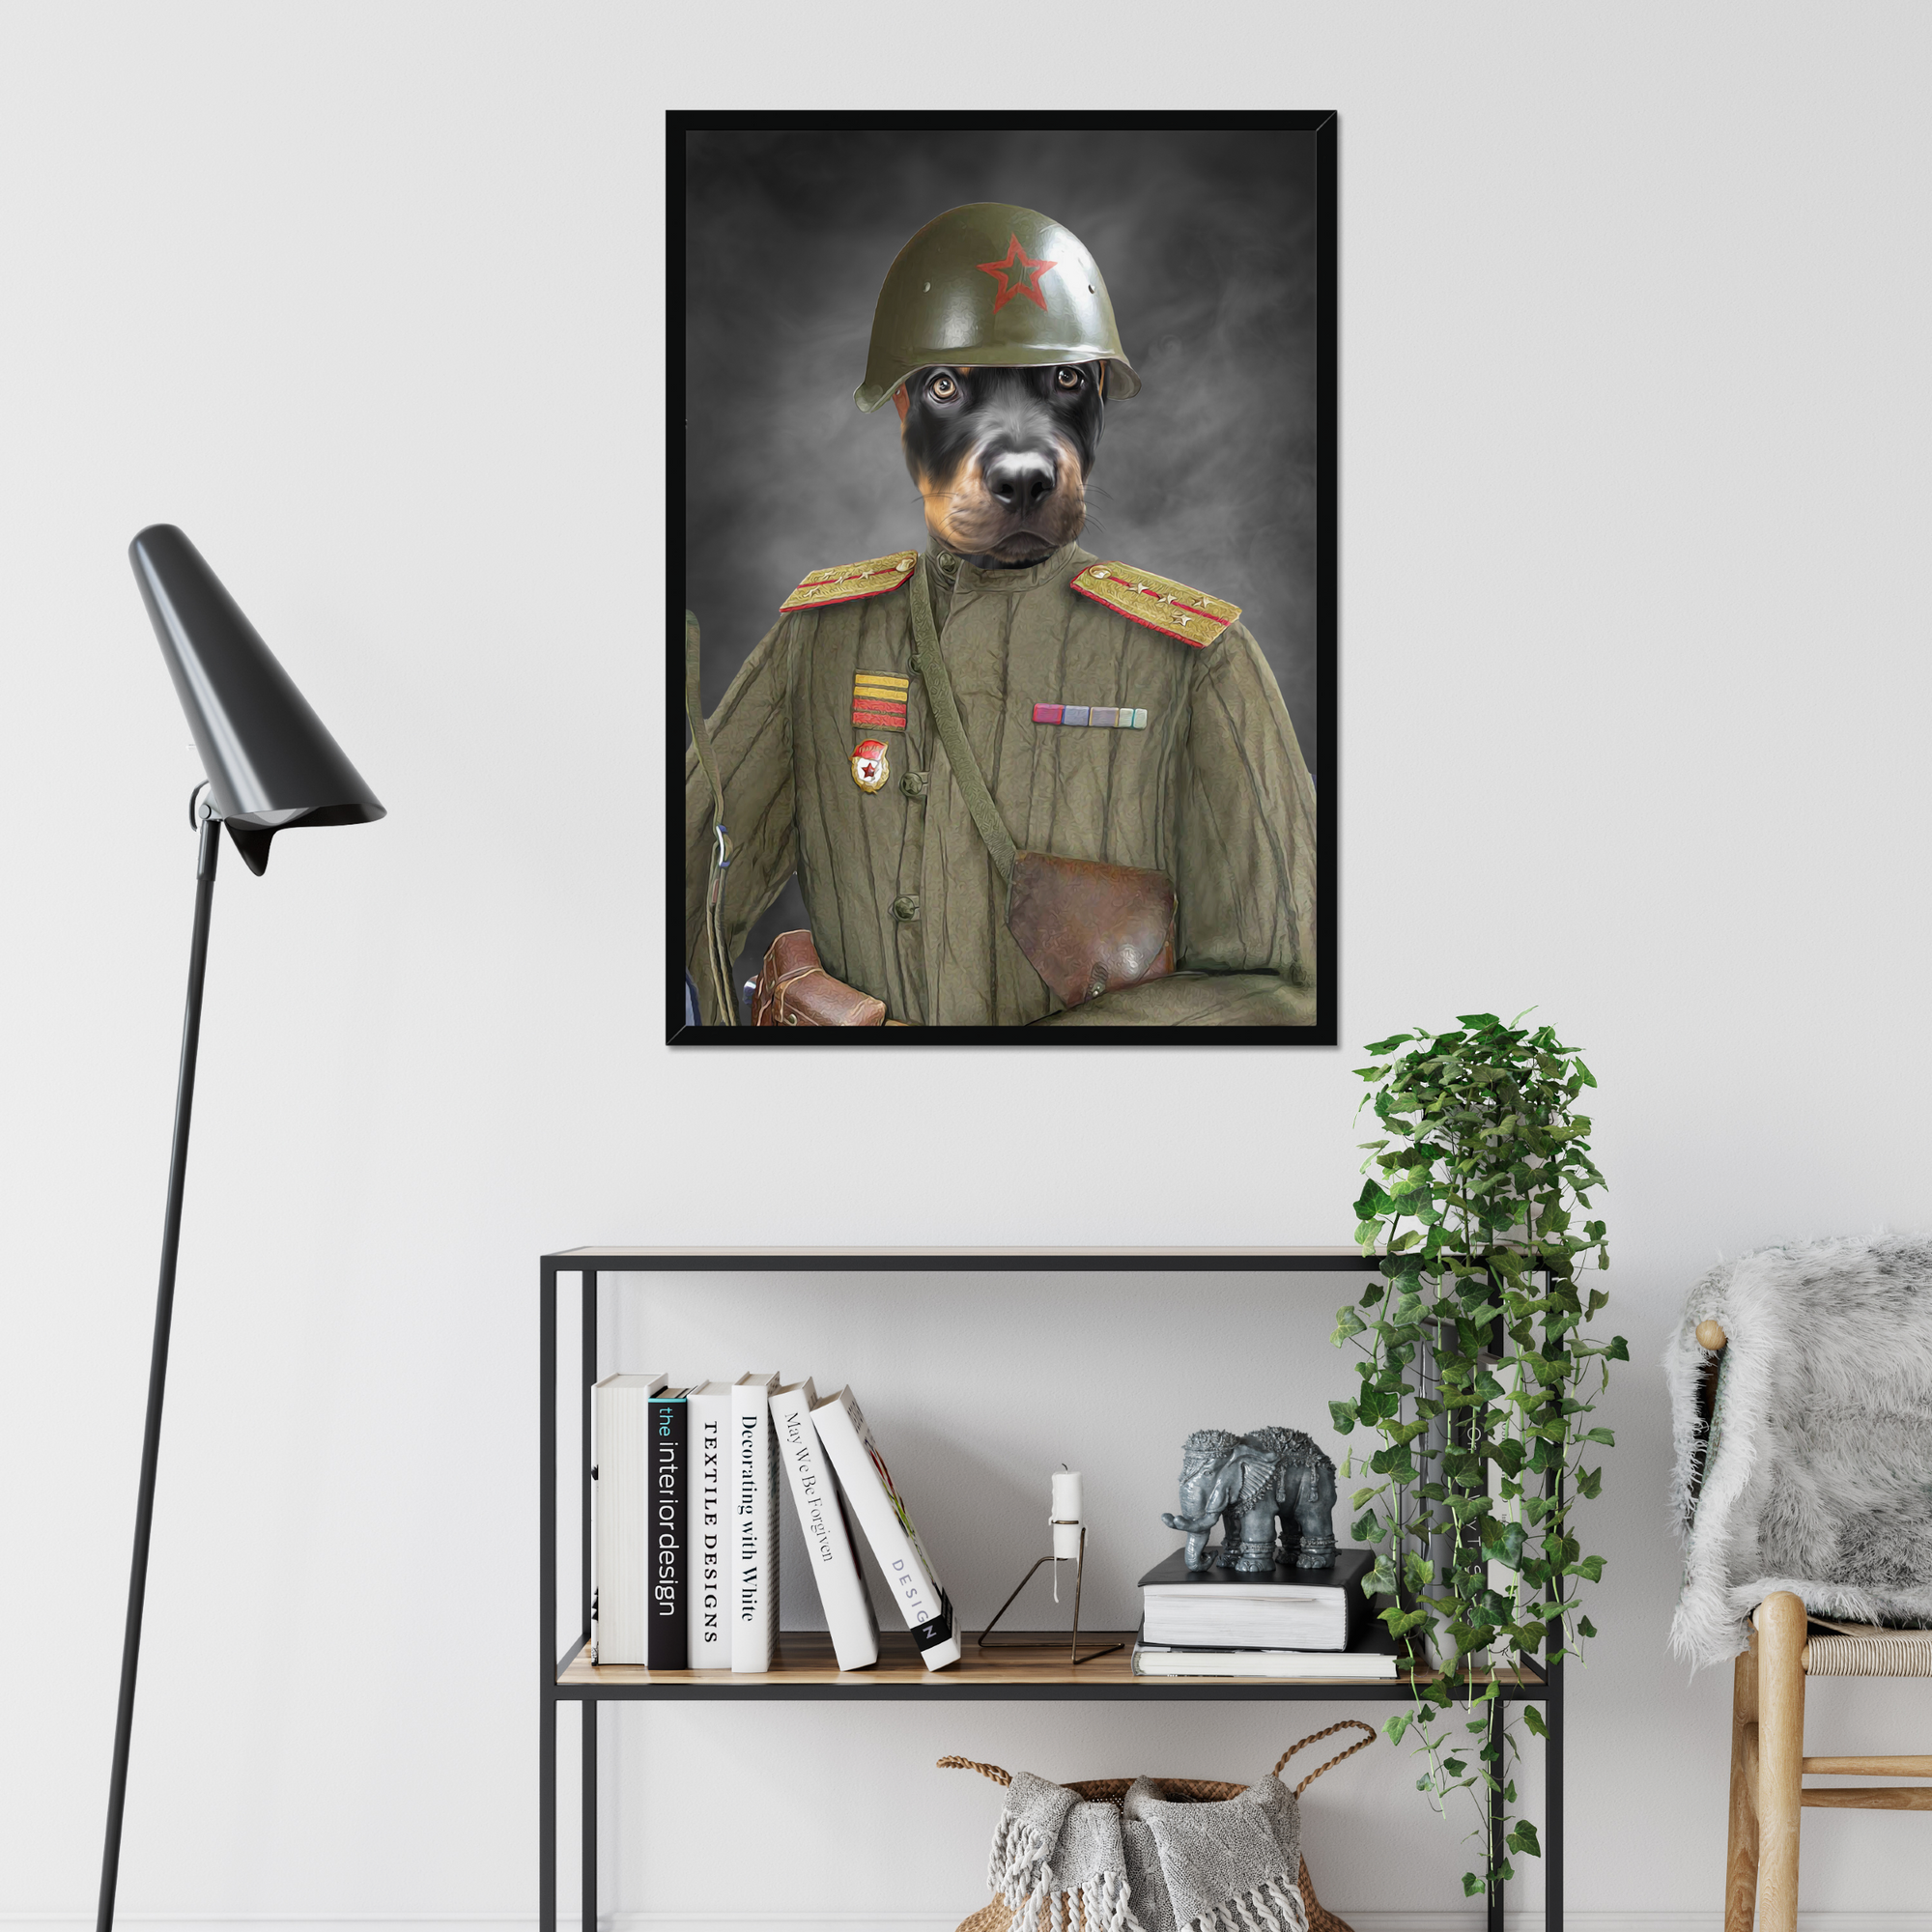 The World War Soldier: Custom Pet Portrait - Paw & Glory - #pet portraits# - #dog portraits# - #pet portraits uk#dog paintings, turn pet photos to art, painting pets, pet portraits in oils, dog portrait painting, Pet portraits, custom dog portrait, painting of pet, Paw and Glory, paintings of pets from photos, painting of your dog